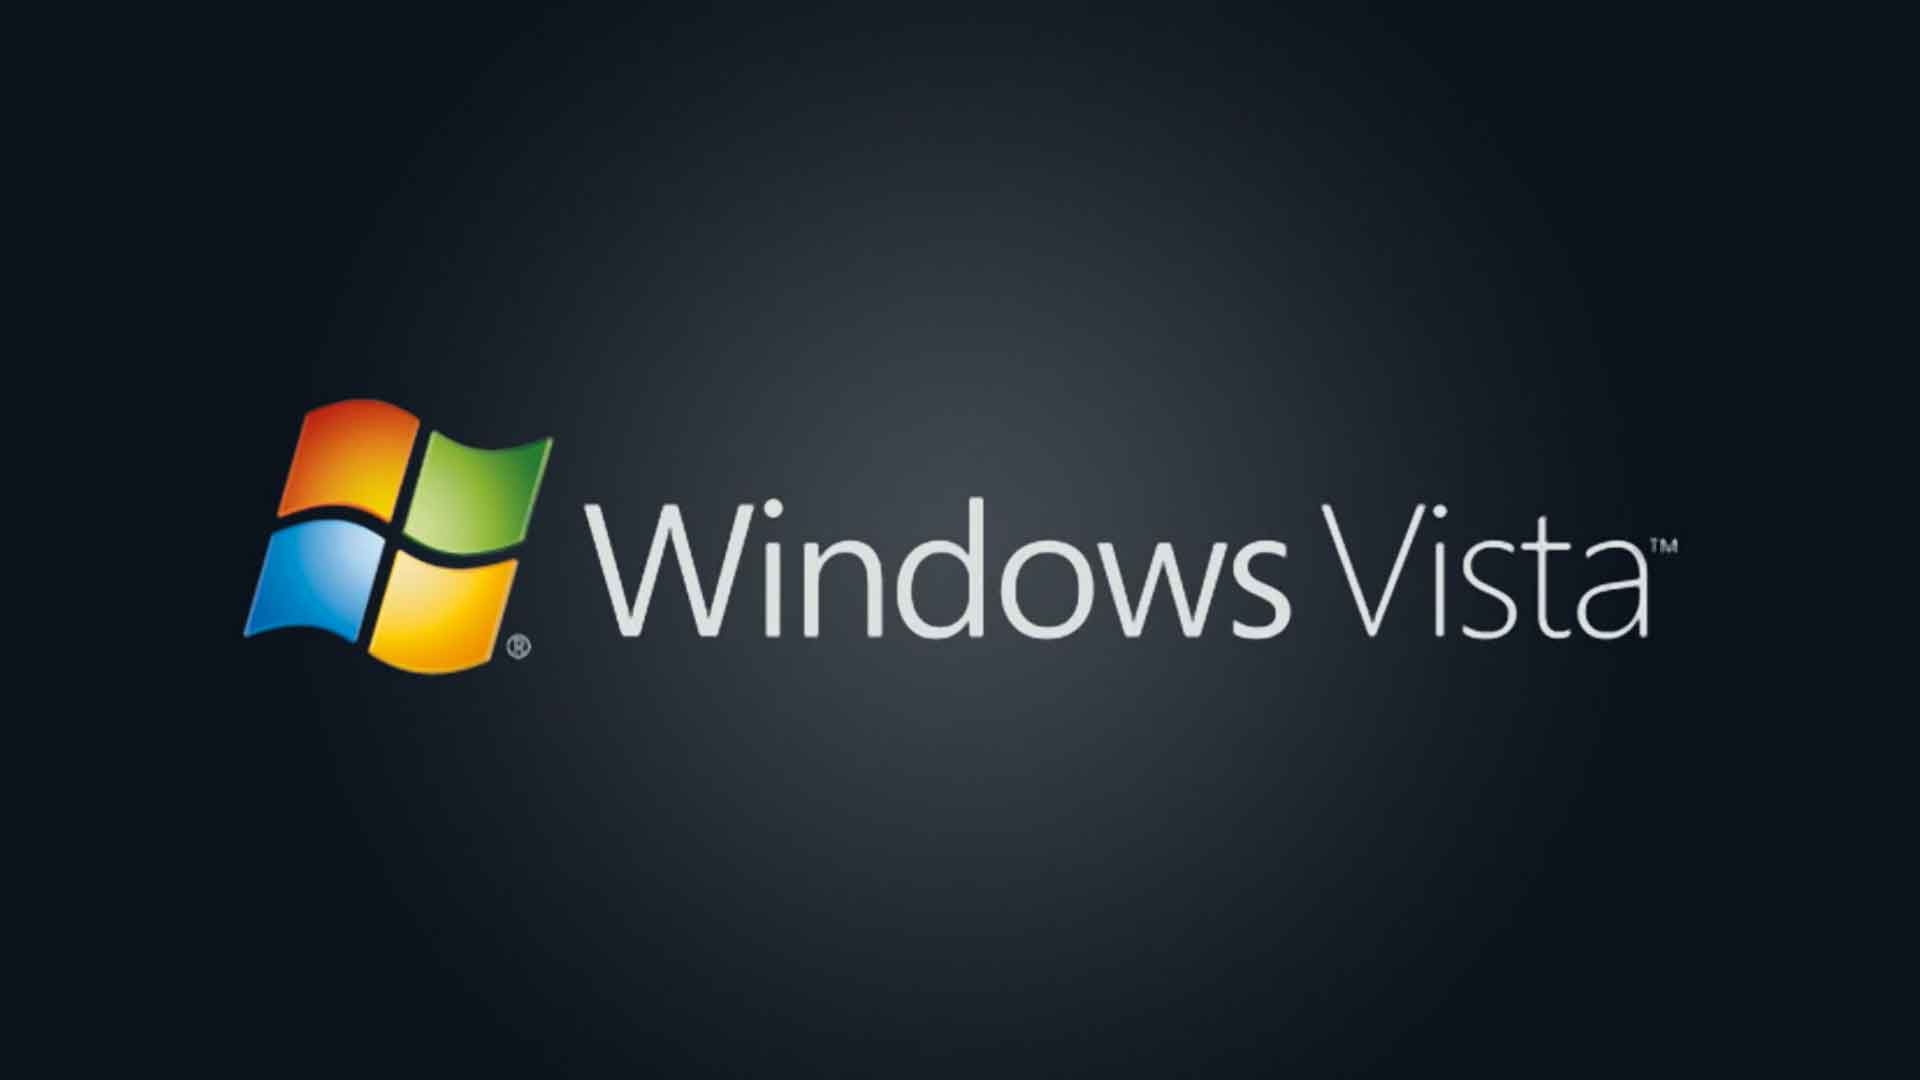 Bill Gates Tries To Get Consumers Excited About Vista